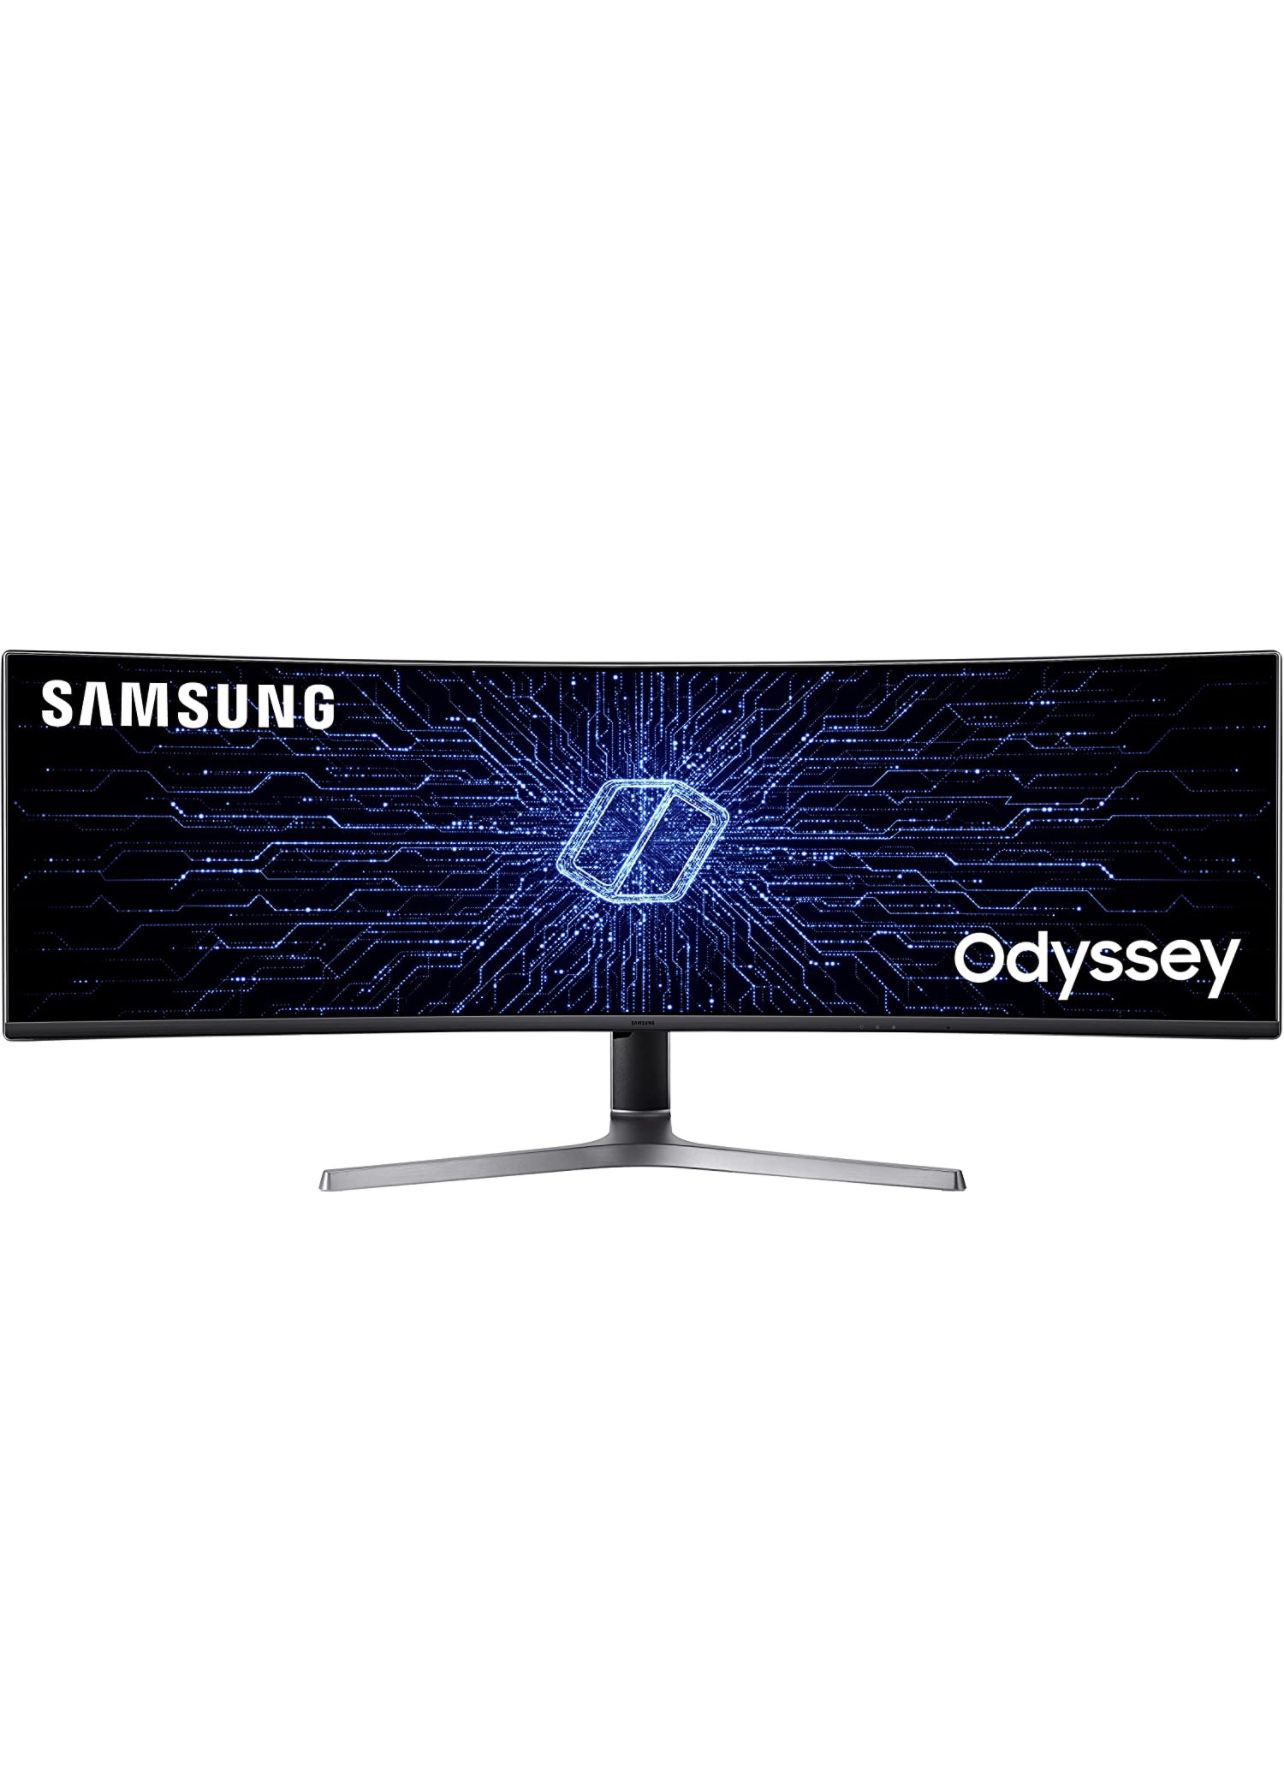 SAMSUNG Odyssey CRG Series 49-Inch Dual QHD (5120x1440) Gaming Monitor, 120Hz, Curved, QLED, HDR, Height Adjustable Stand, Radeon FreeSync (LC49RG90SS